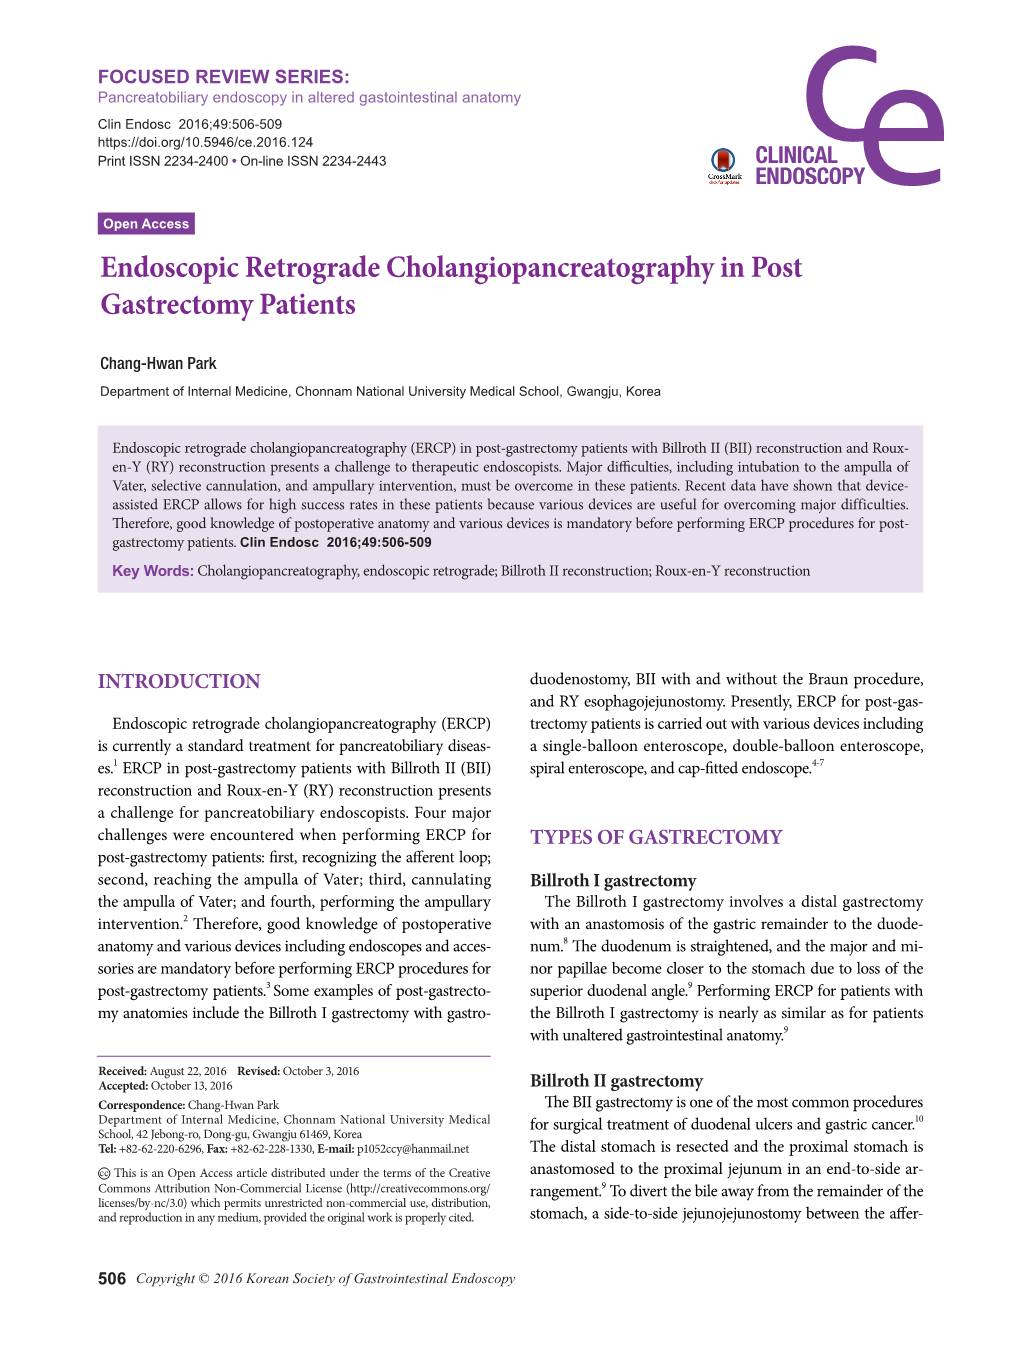 Endoscopic Retrograde Cholangiopancreatography in Post Gastrectomy Patients